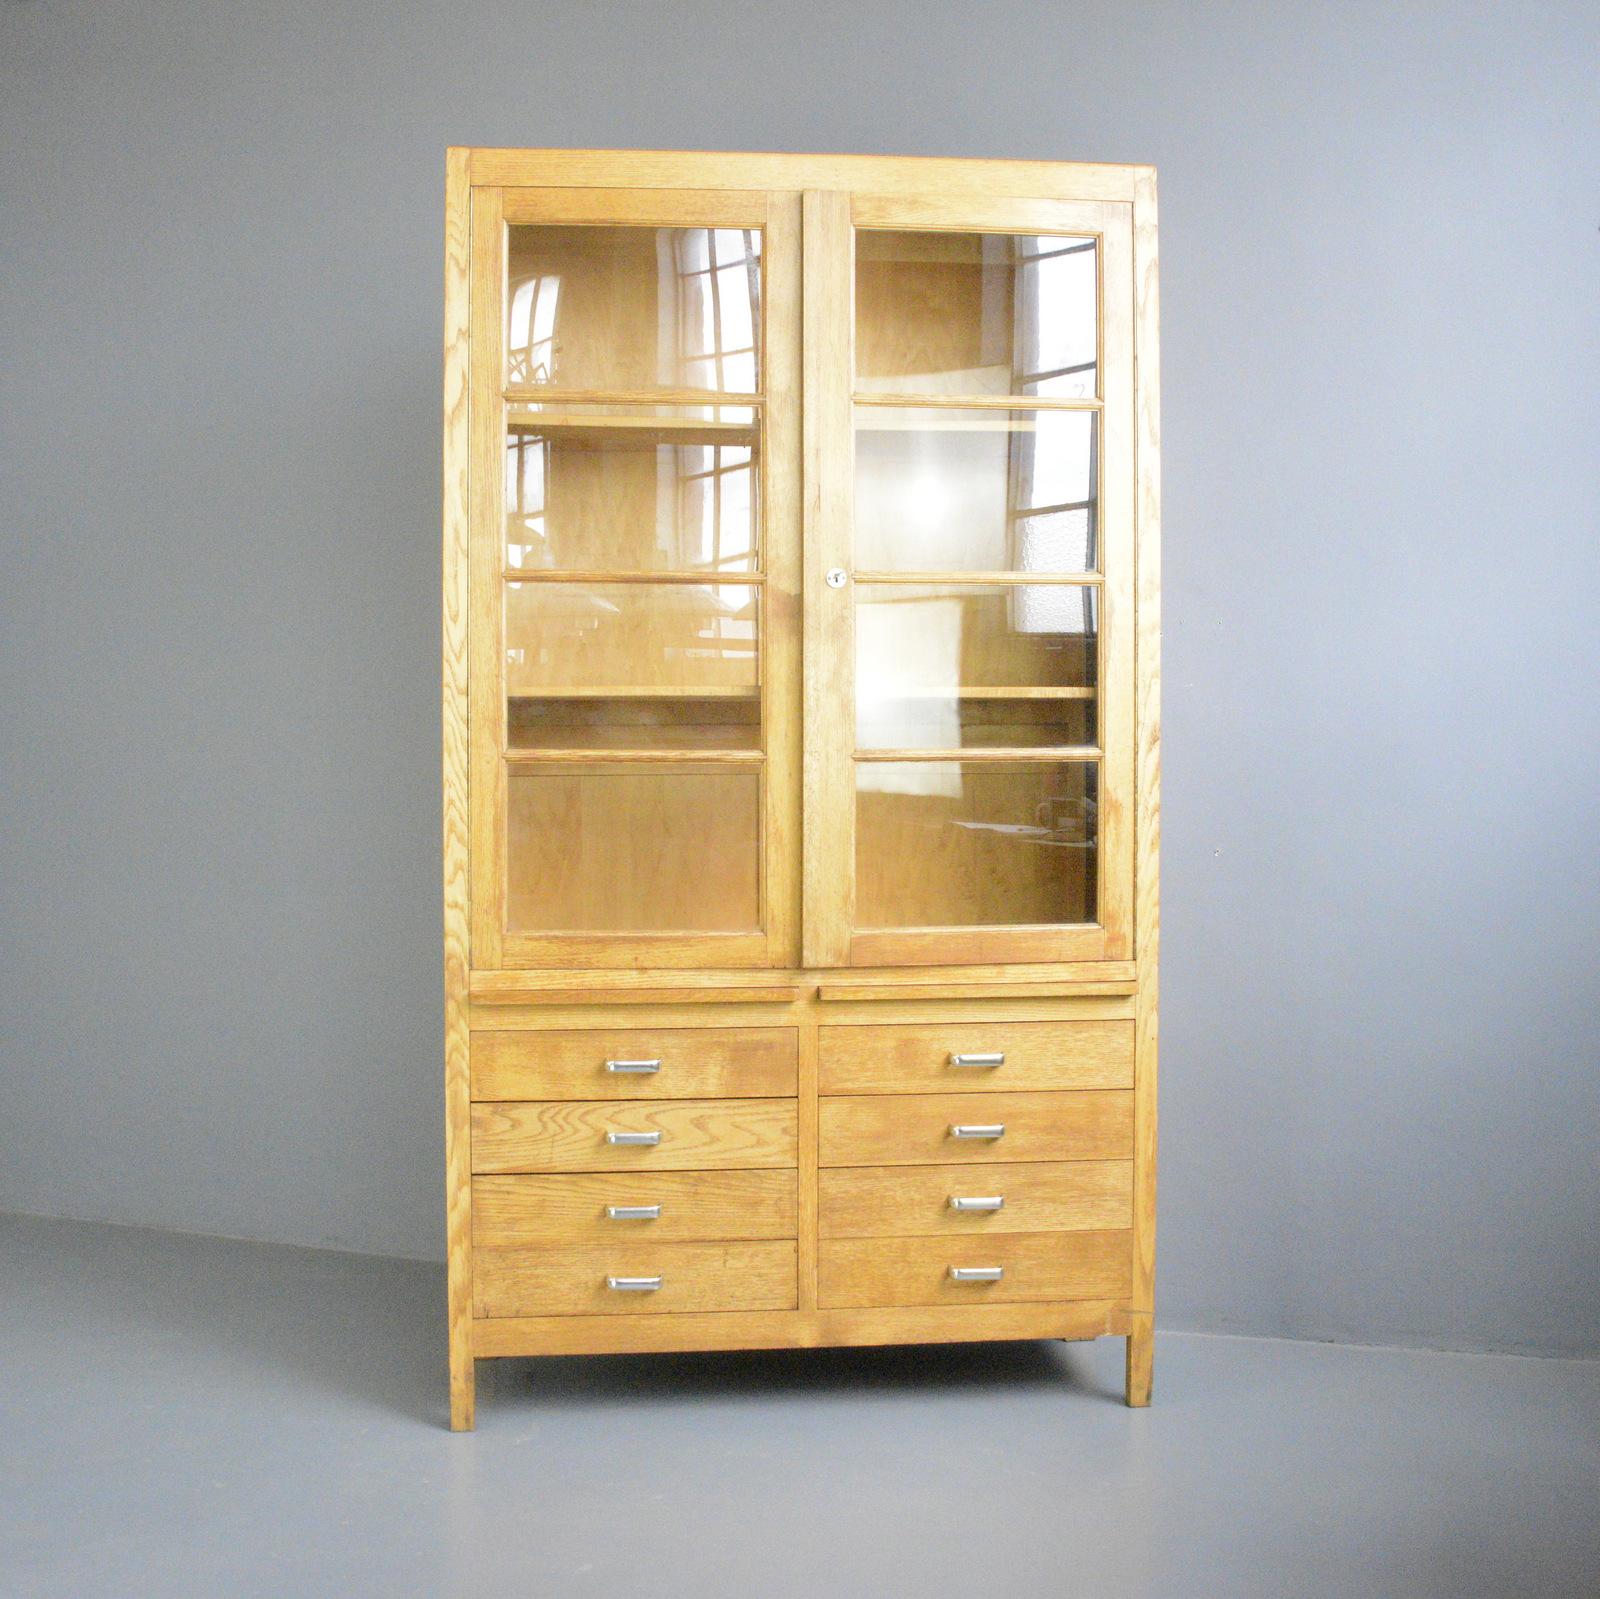 - Solid Beech with glass doors
- 2 shelves and 8 drawers
- Original lock and key
- Originally from a university library
- Danish ~ 1950s
- 130cm wide x 44cm deep x 230cm tall

Condition Report

All drawers run smoothly along with the lock